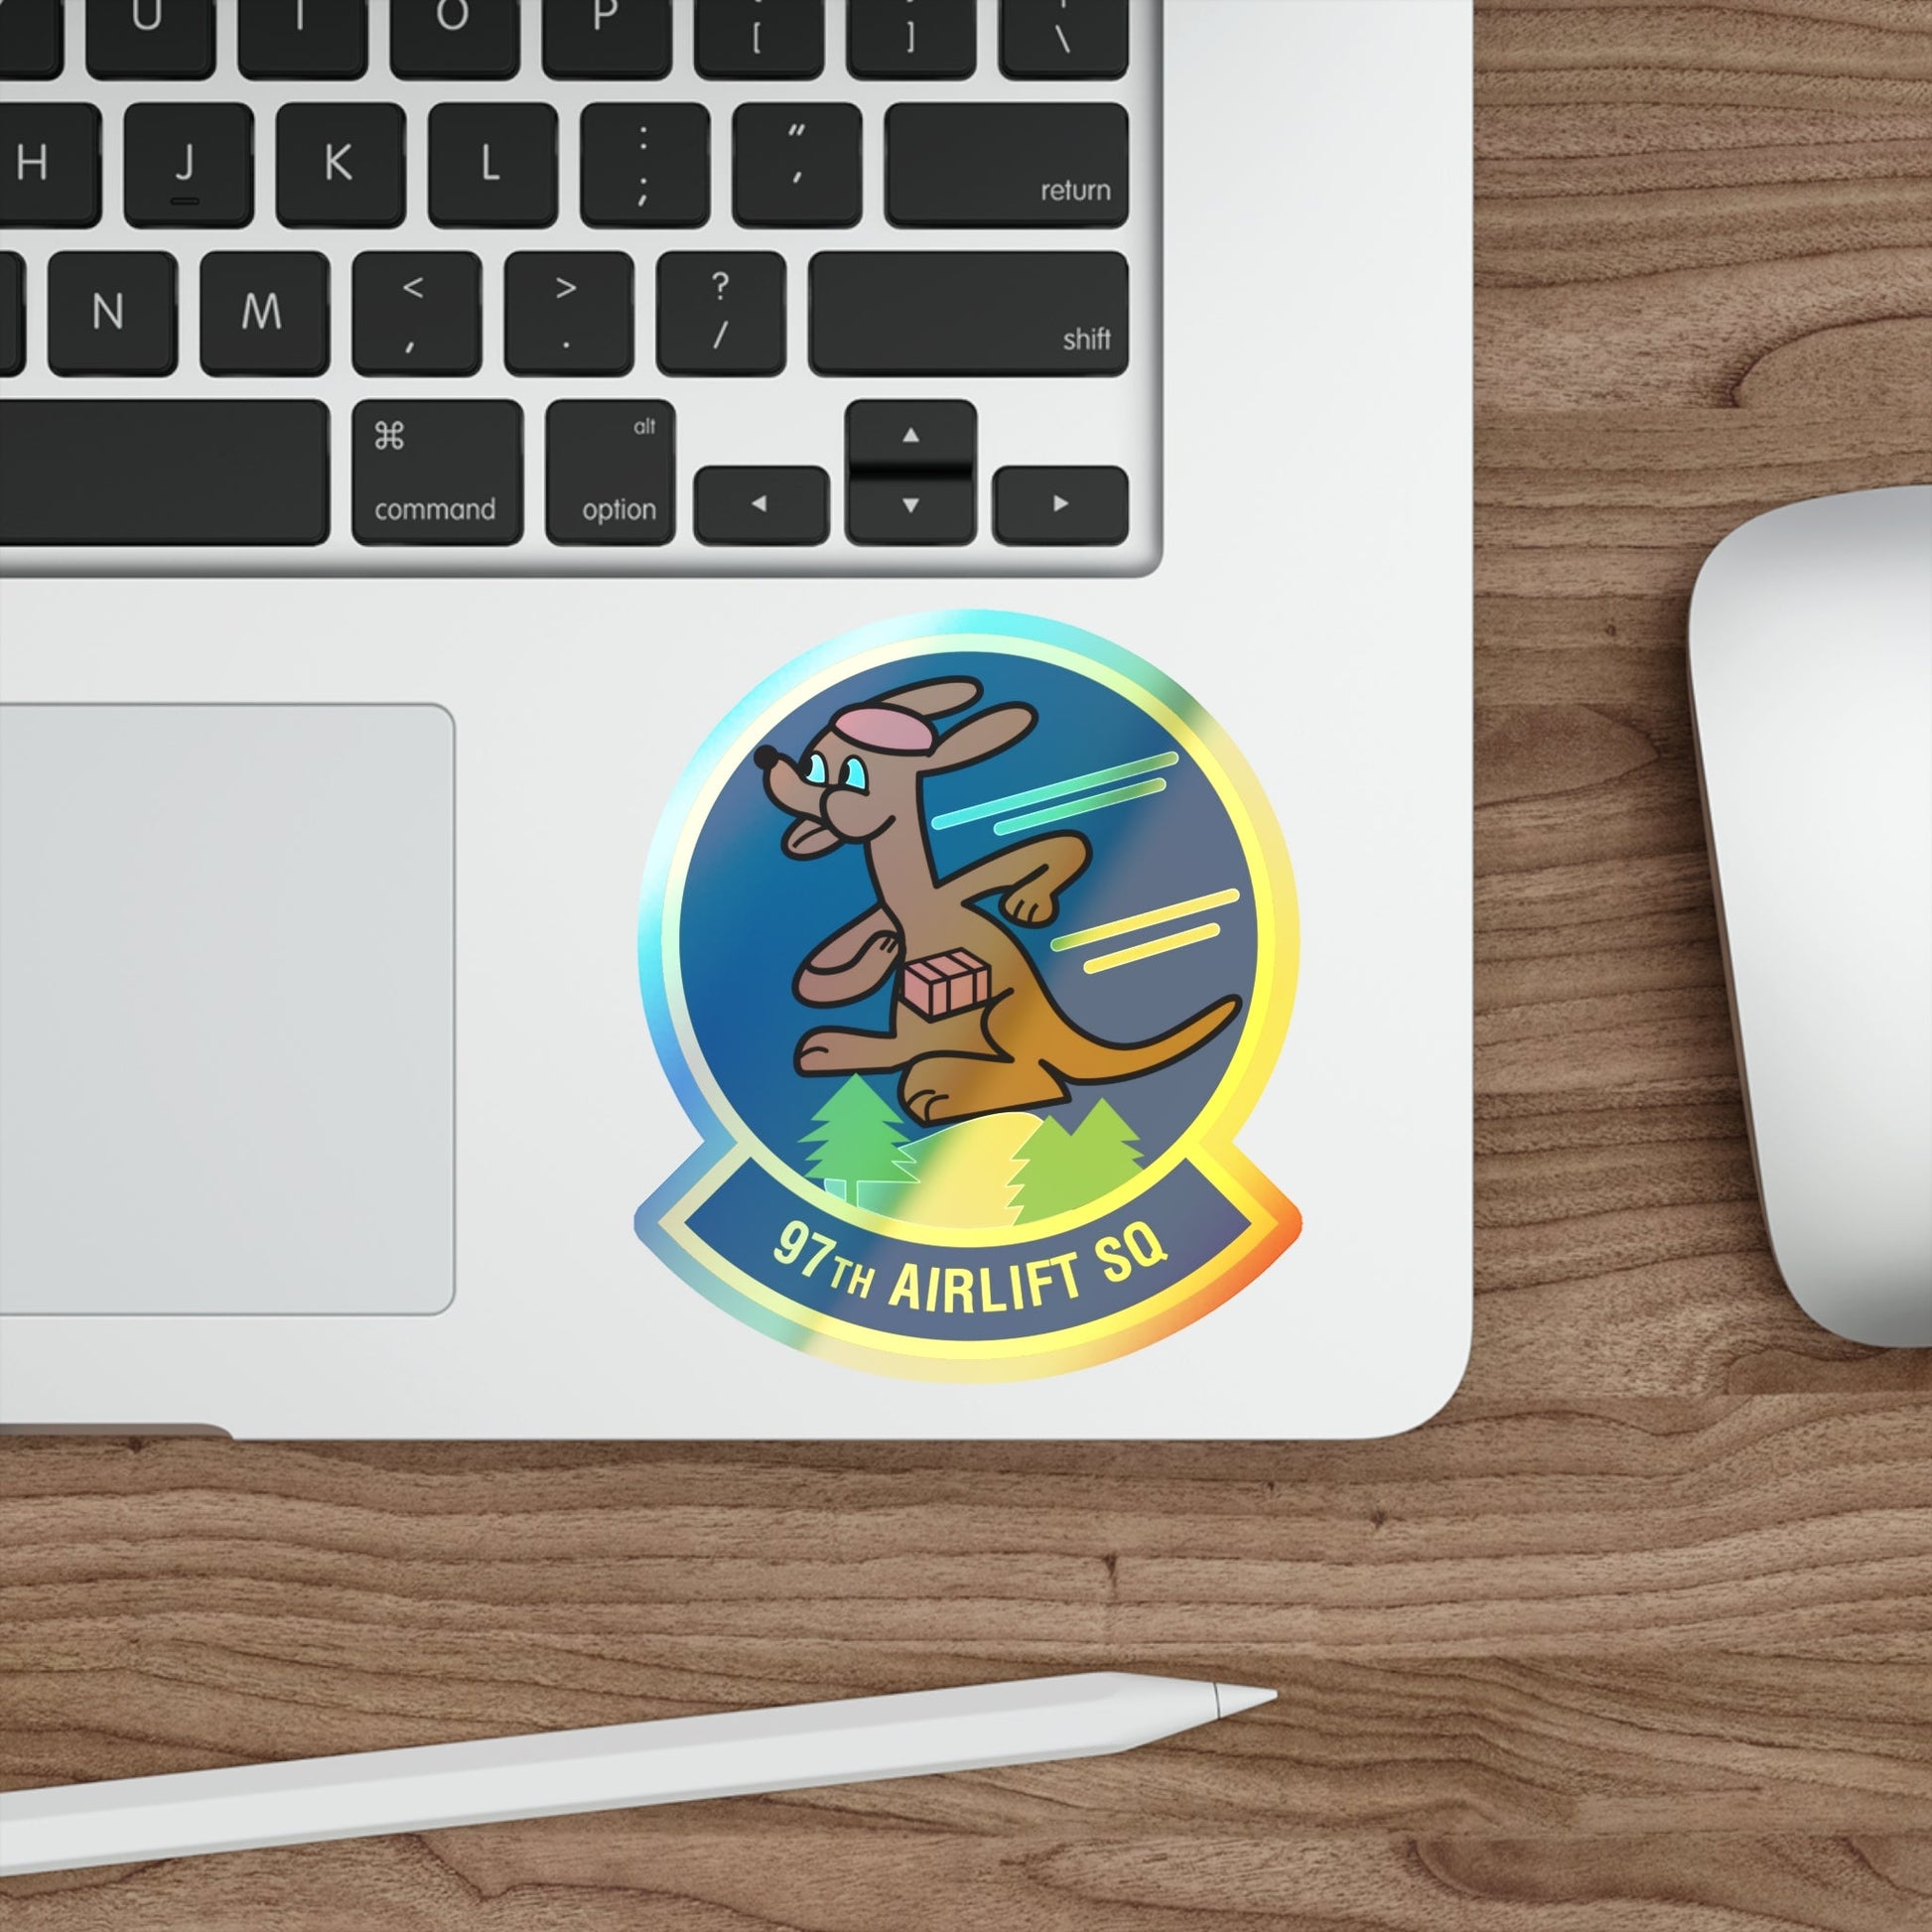 97 Airlift Squadron AFRC (U.S. Air Force) Holographic STICKER Die-Cut Vinyl Decal-The Sticker Space